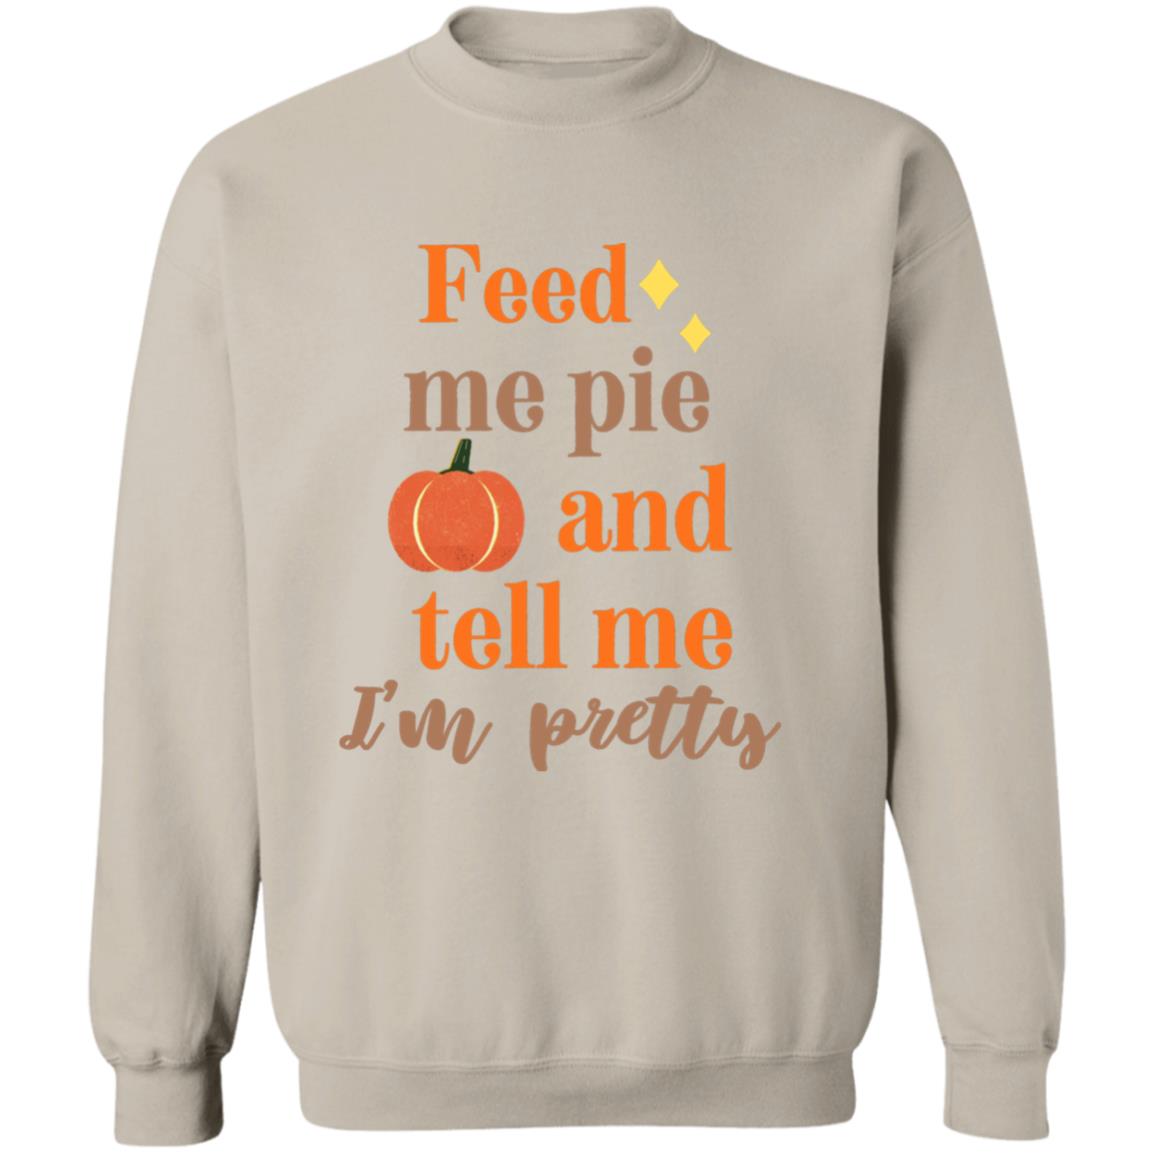 Get trendy with Feed me pie and tell me I'm pretty (1) - Sweatshirts available at Good Gift Company. Grab yours for $27.20 today!